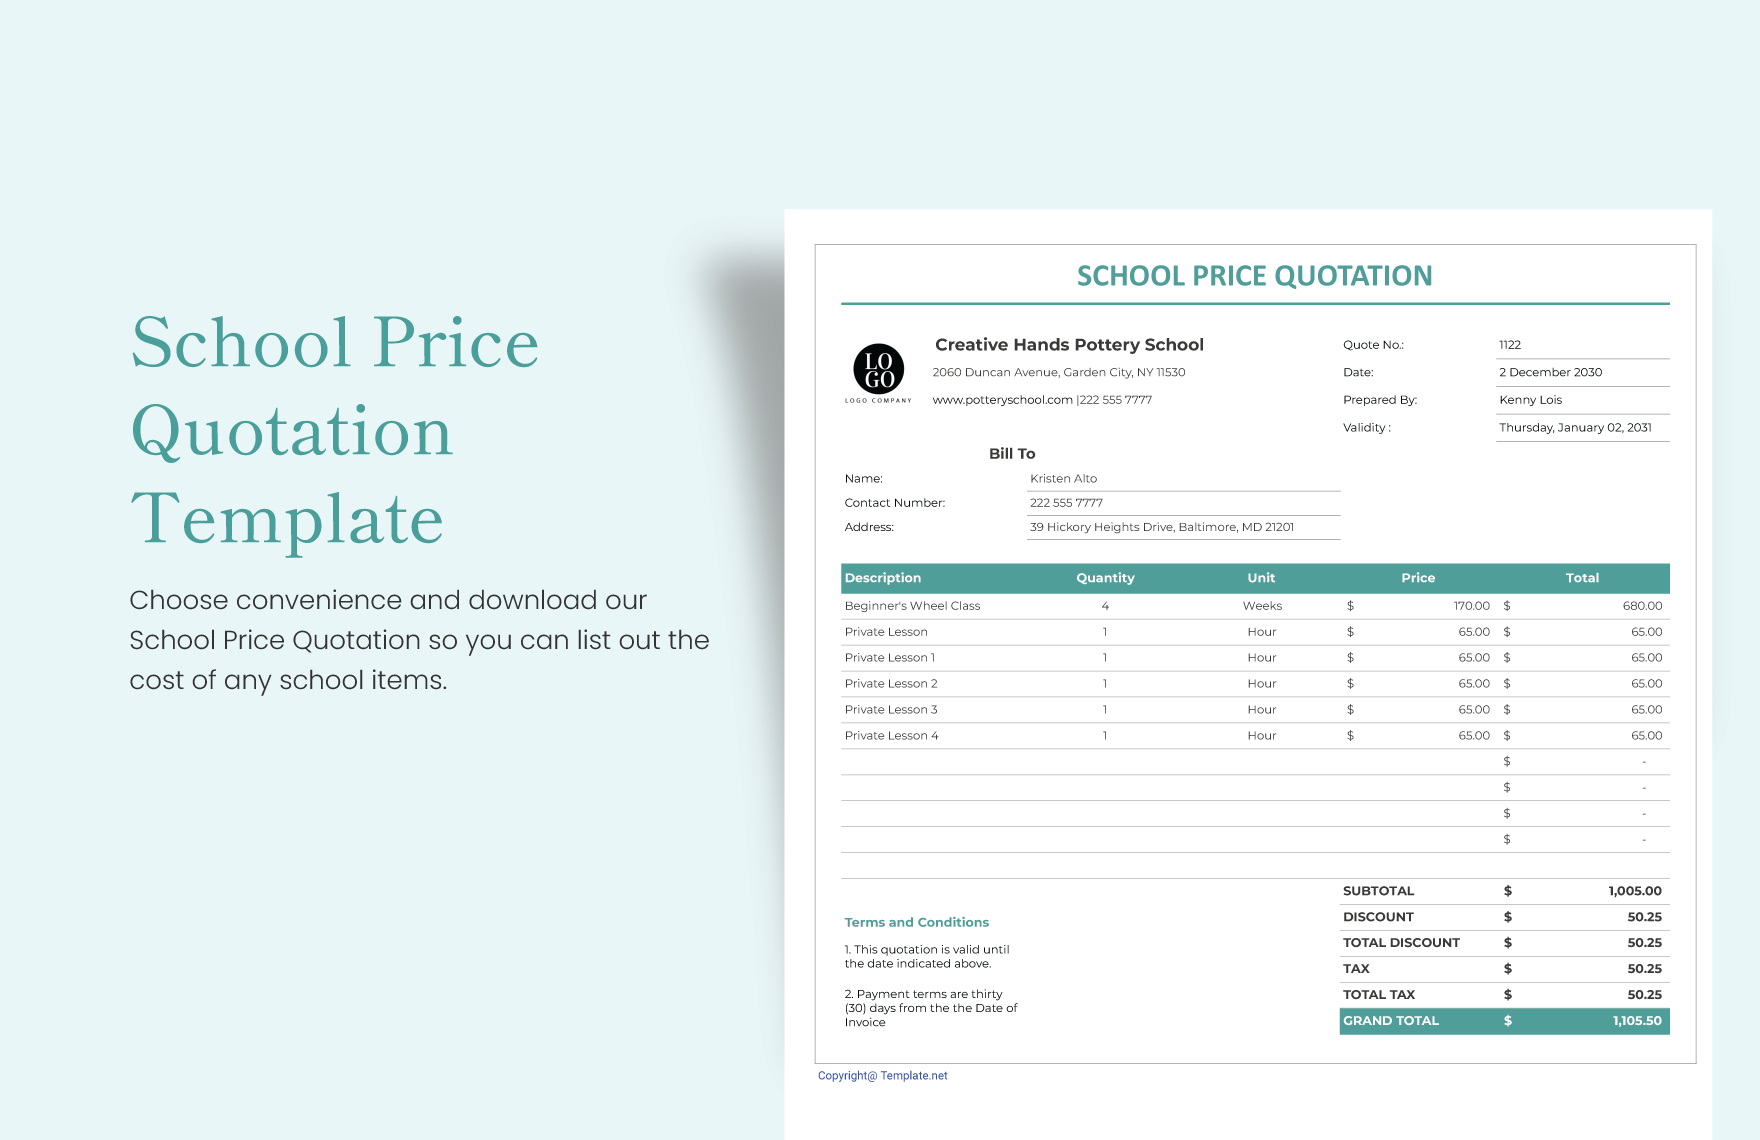 School Price Quotation Template in Word, Google Docs, Excel, Google Sheets, PSD